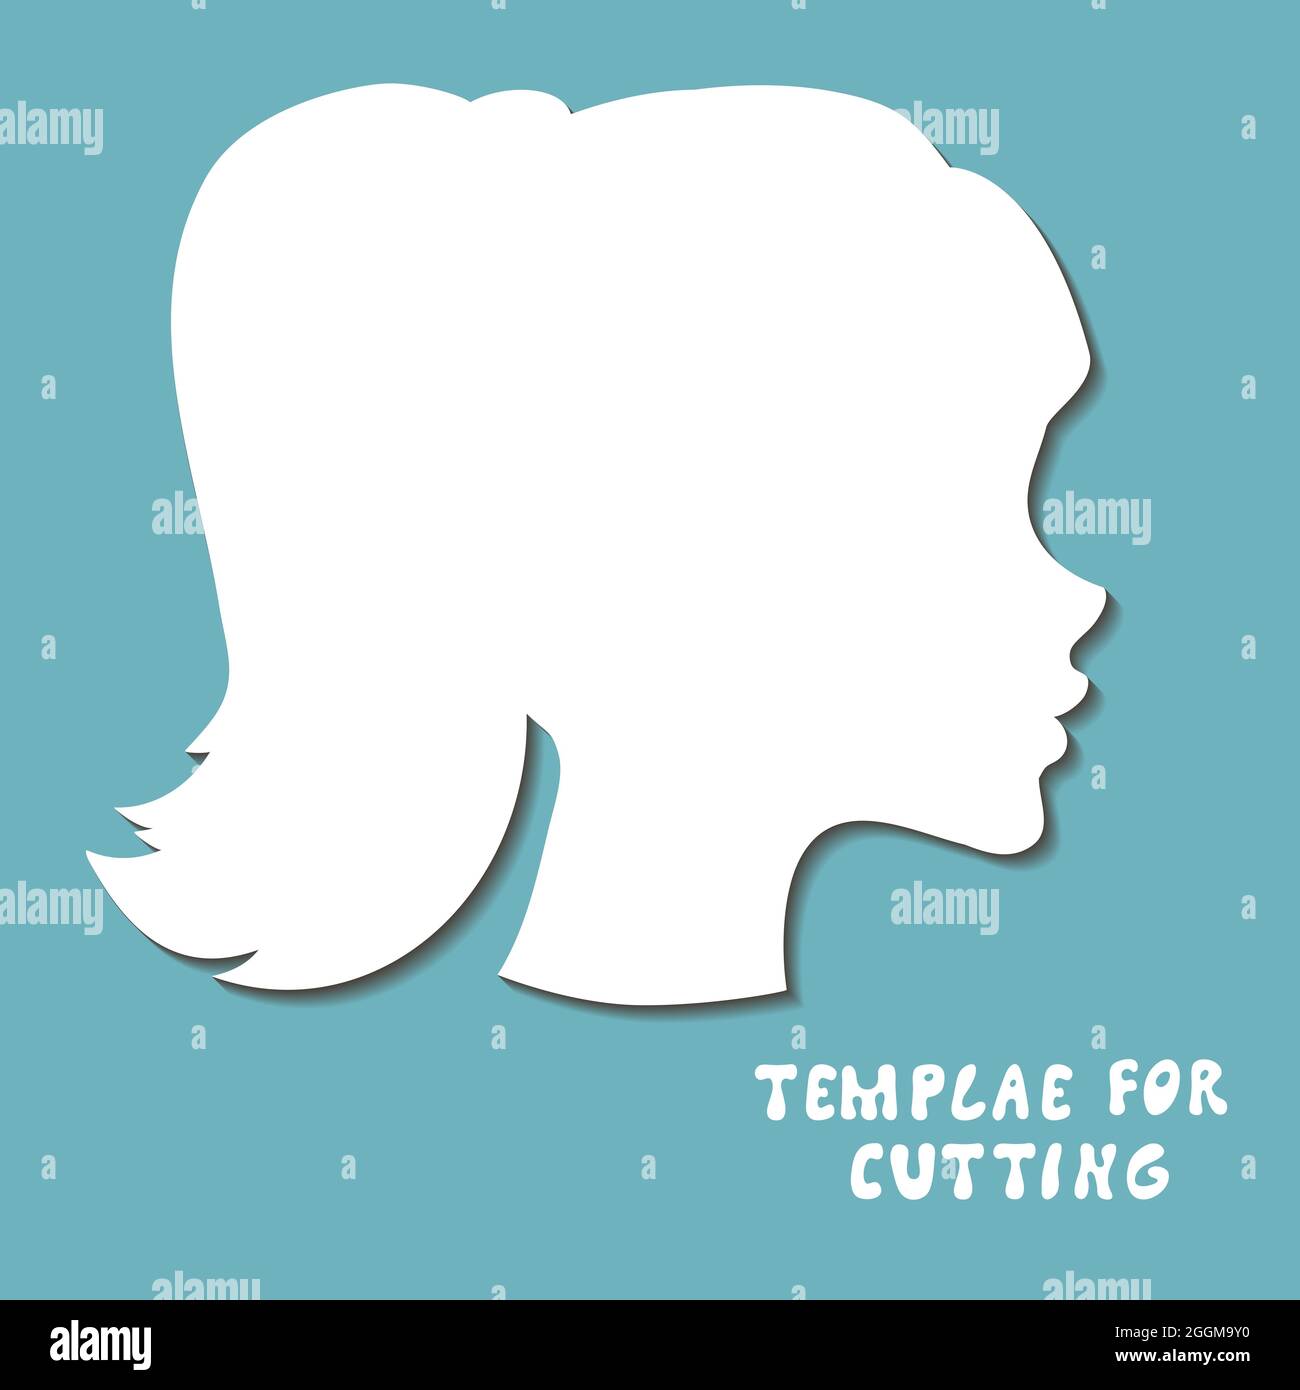 Template for laser cutting, wood carving, paper cut. Silhouettes for cutting. Woman head vector stencil Stock Vector